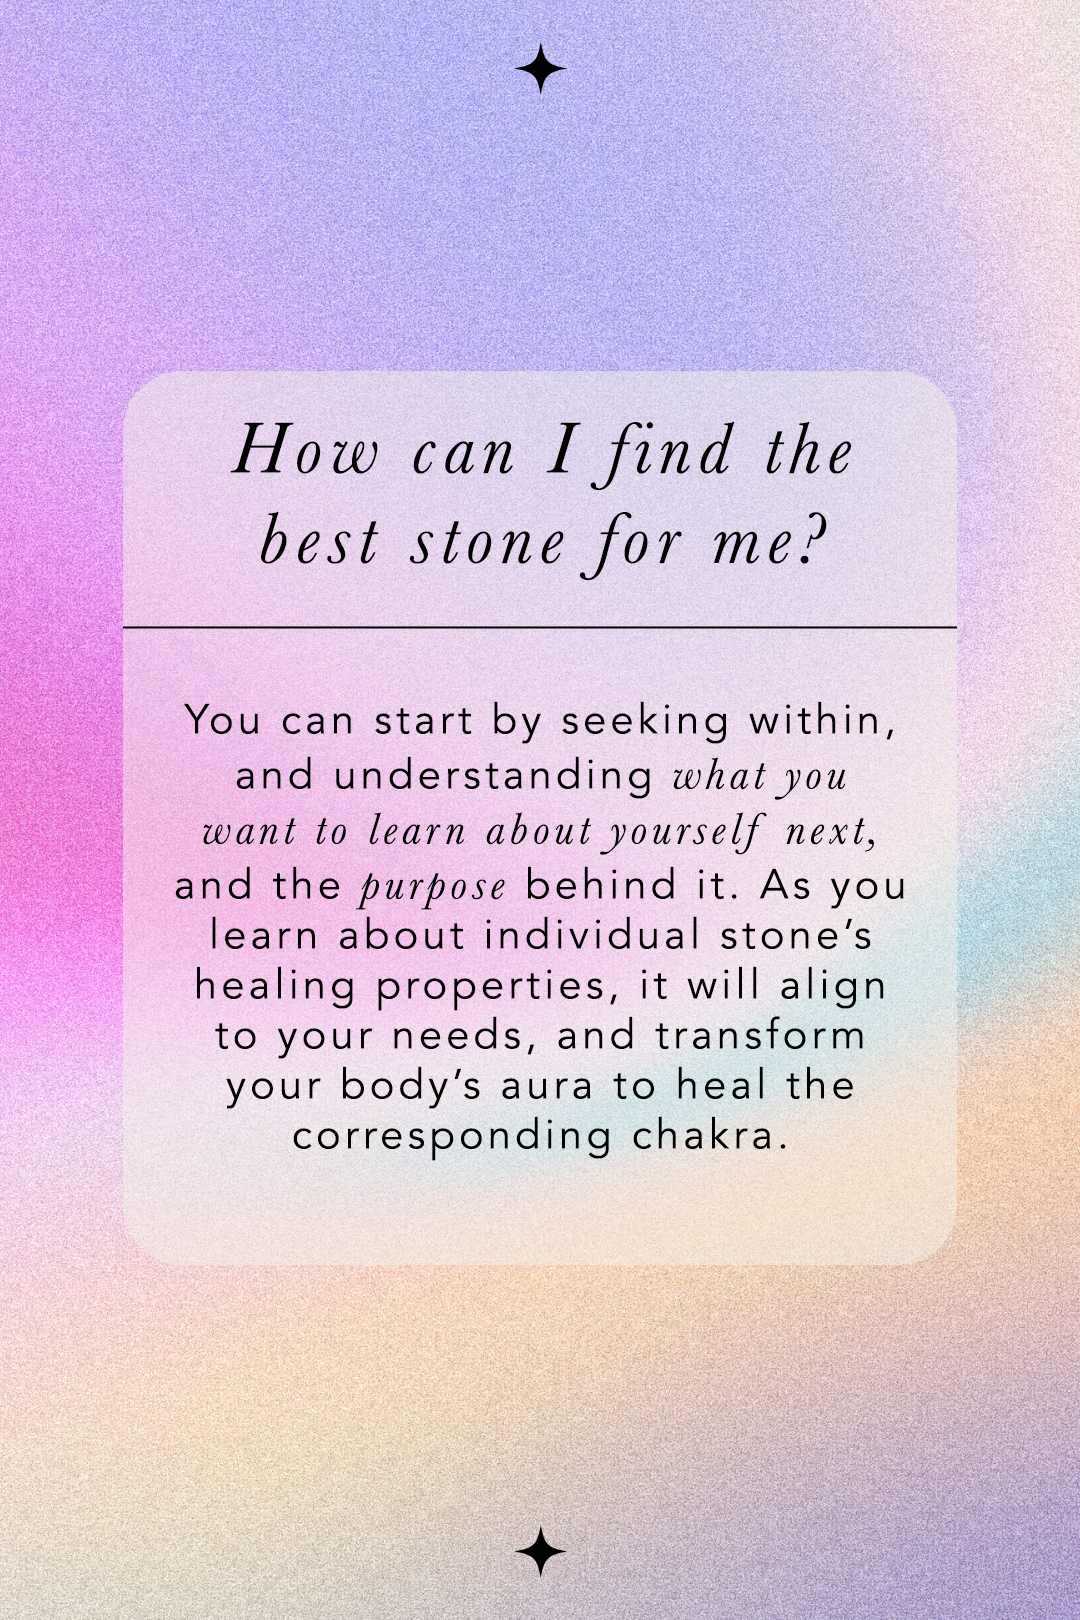 How can I find the best stone for me? You can start by seeking within, and understanding what you want to learn about yourself next, and the purpose behind it. As you learn about individual stone's healing properties, it will align to your needs, and transform your body's aura to heal the corresponding chakra.